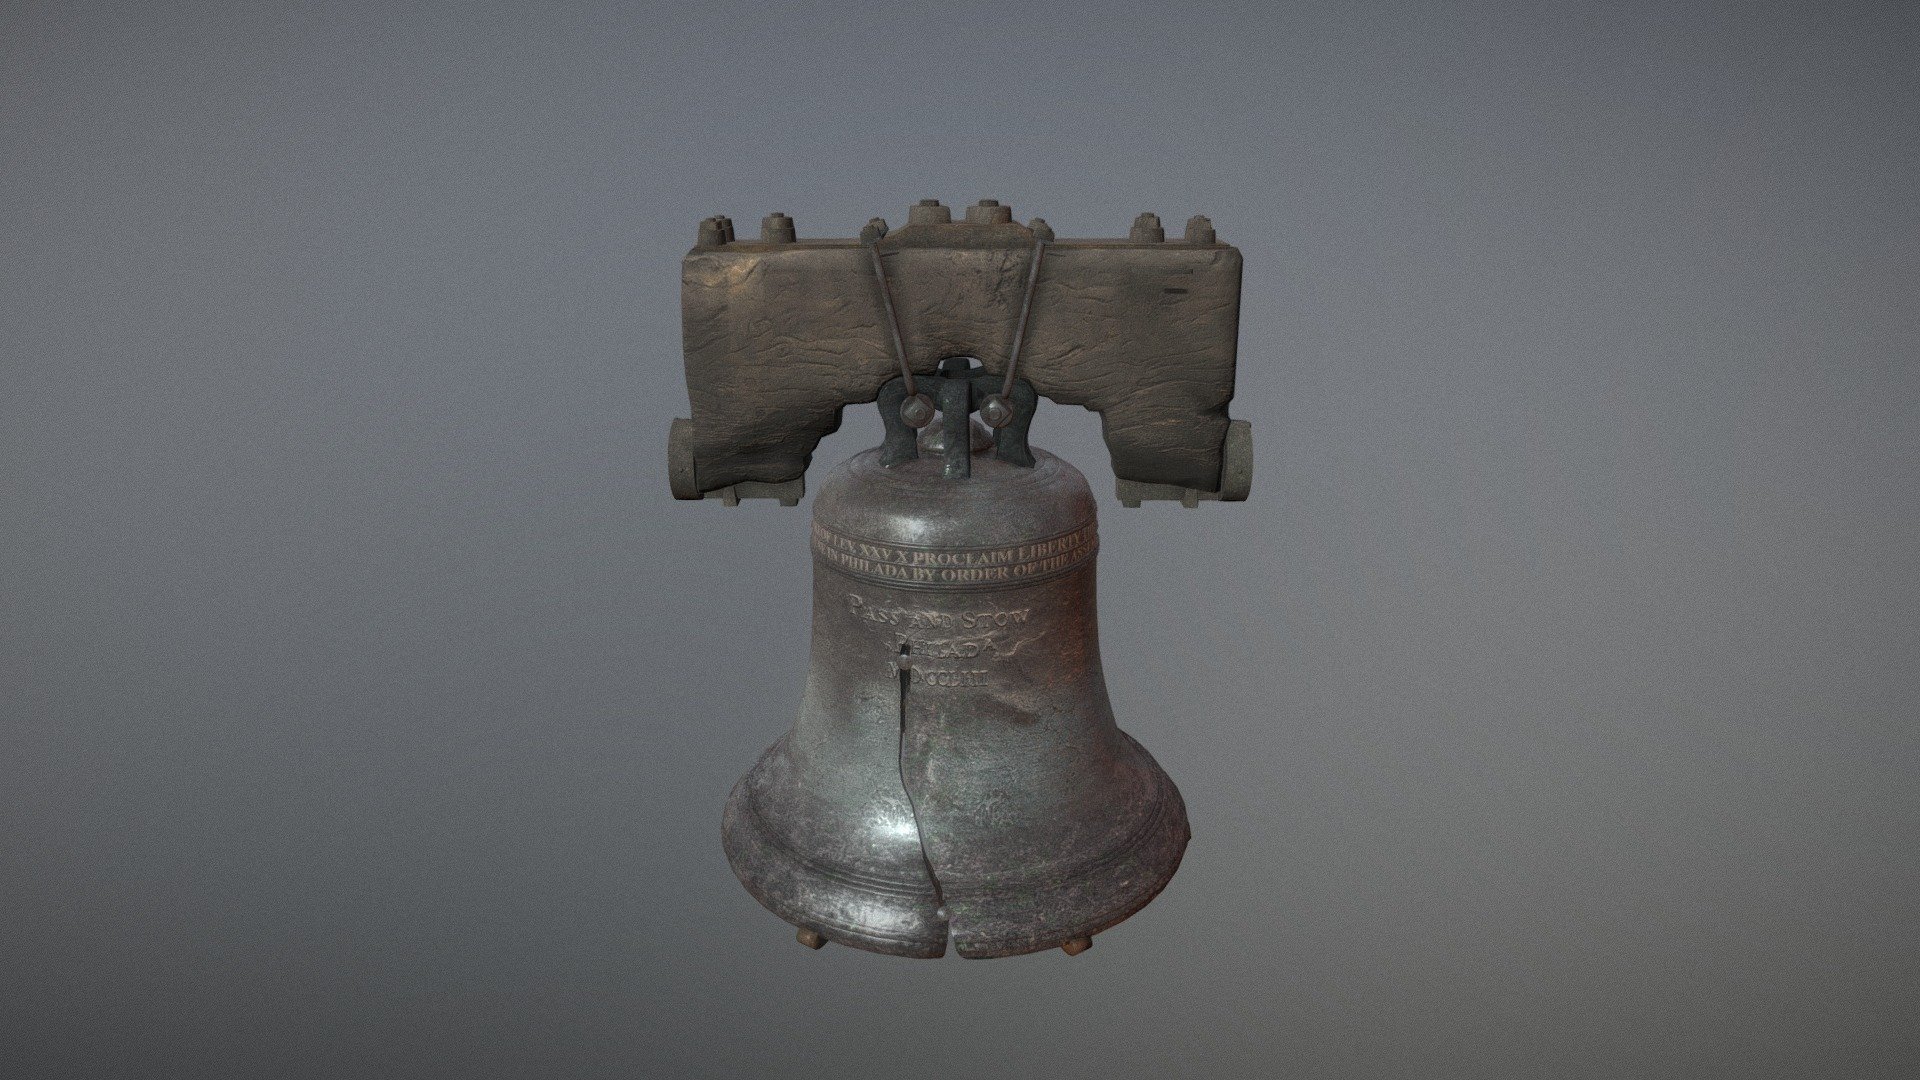 The Liberty Bell -
bears a timeless message: &ldquo;Proclaim Liberty Throughout All the Land Unto All the Inhabitants thereof